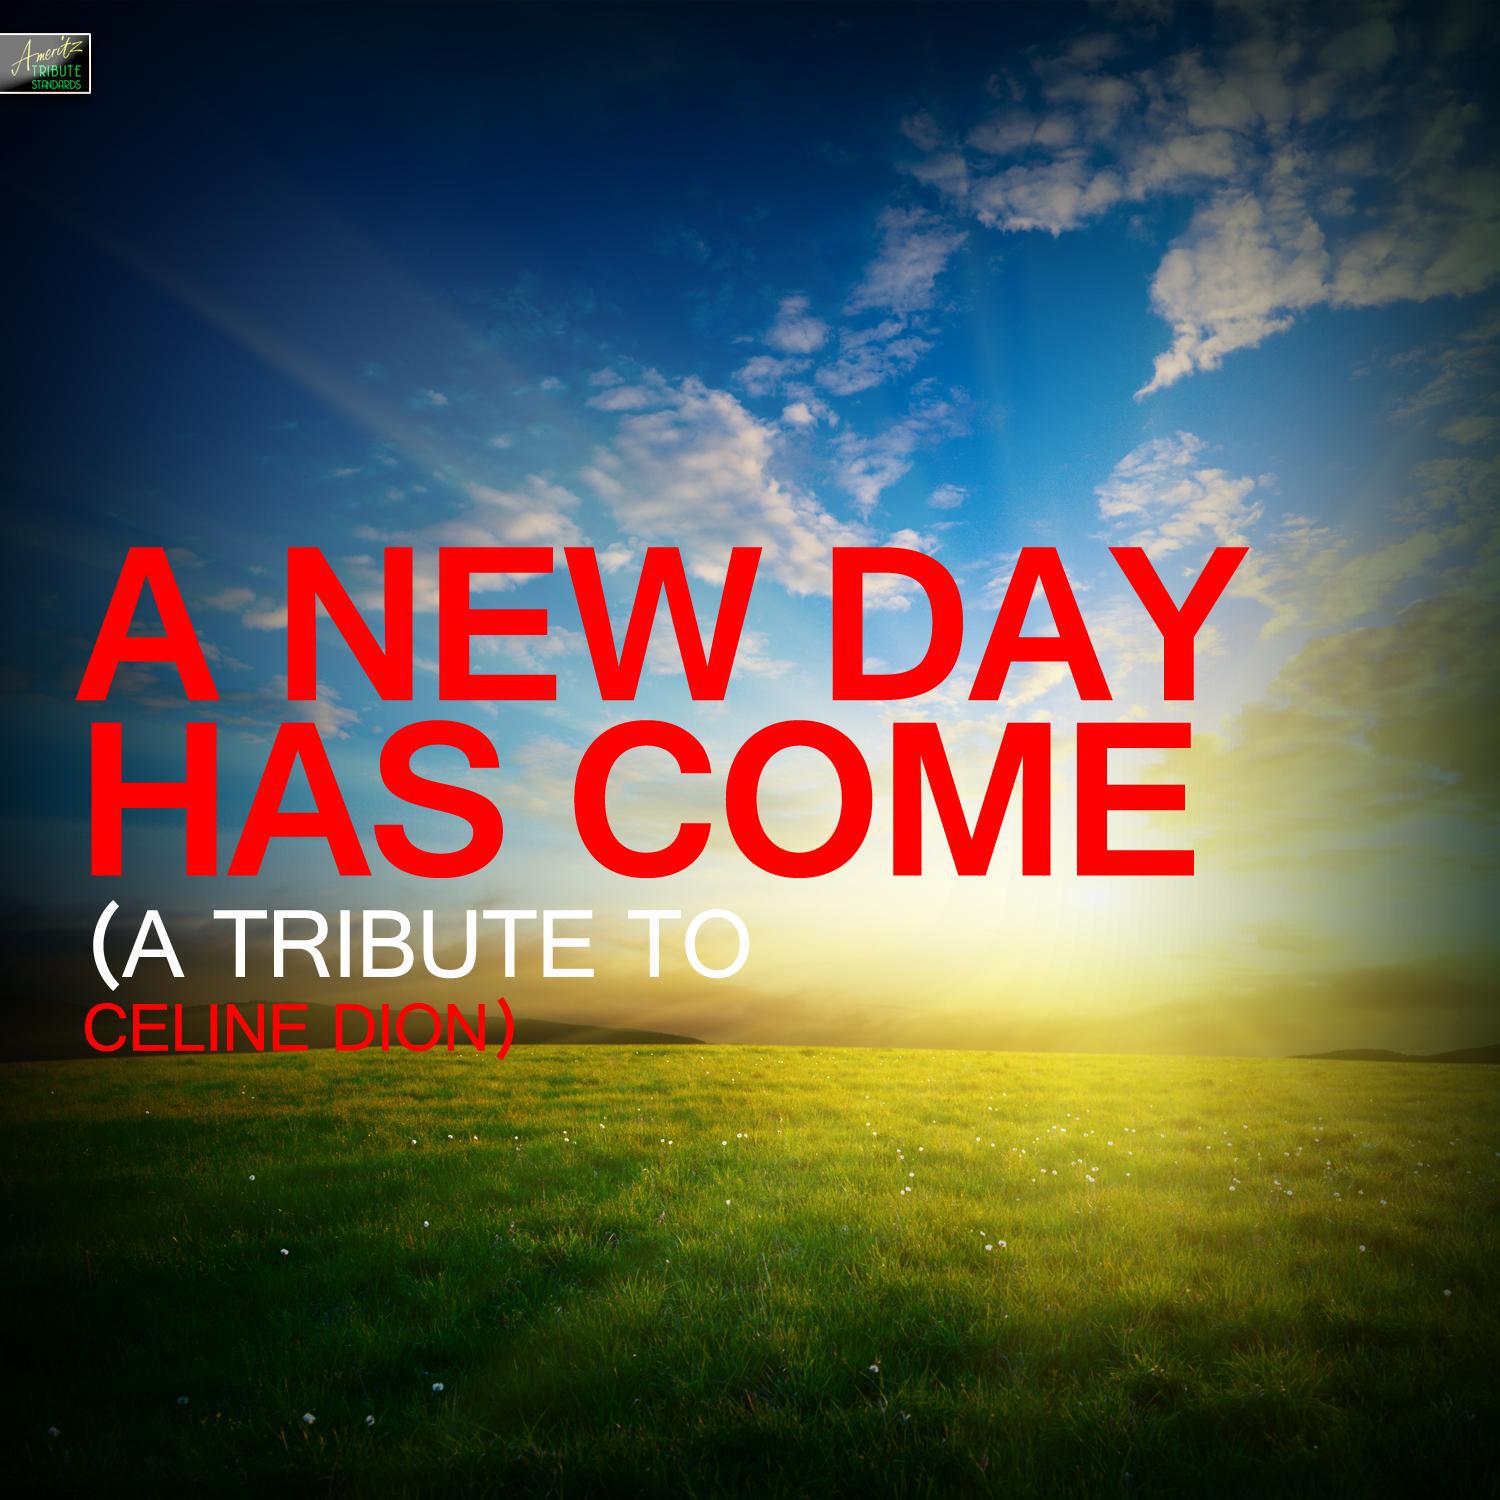 A New Day Has Come - A Tribute to Celine Dion